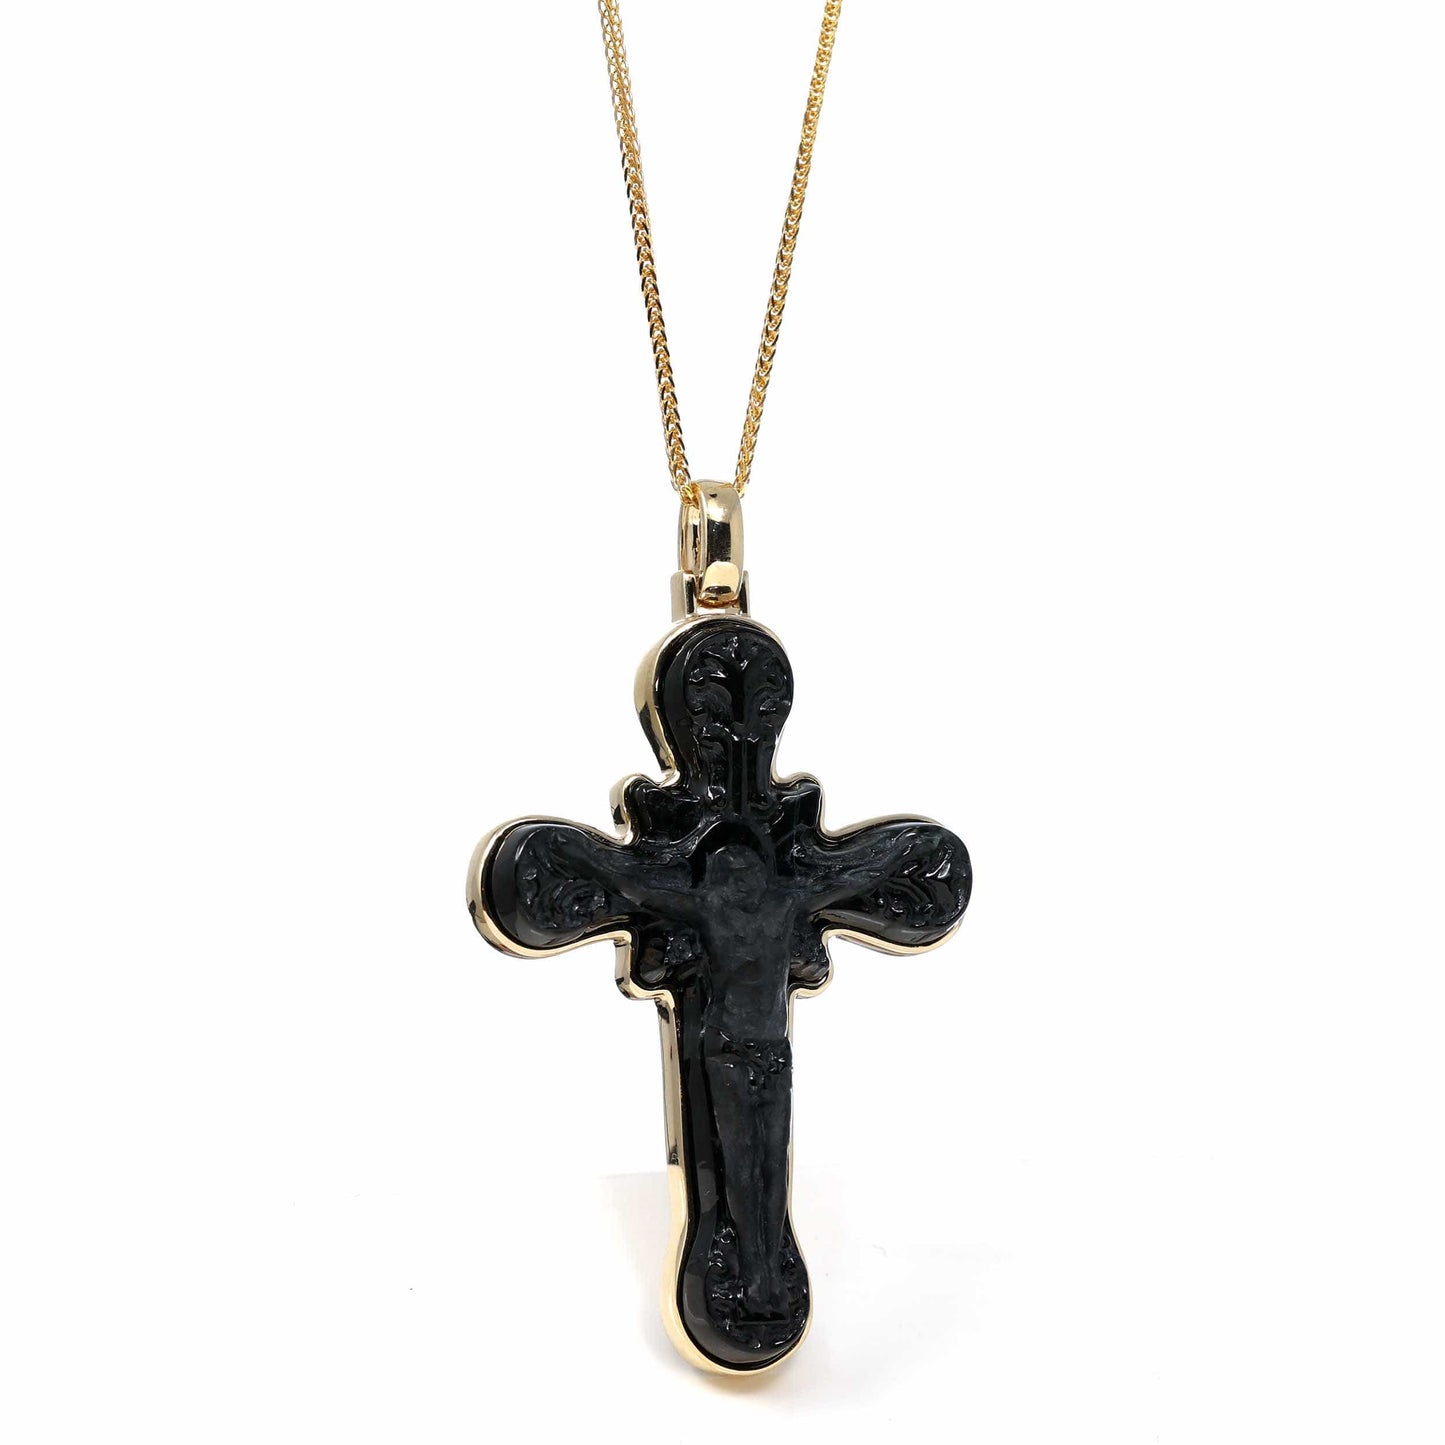 24K YELLOW GOLD CROSS PENDANT NECKLACE WITH PAVE DIAMONDS – Belle Cose